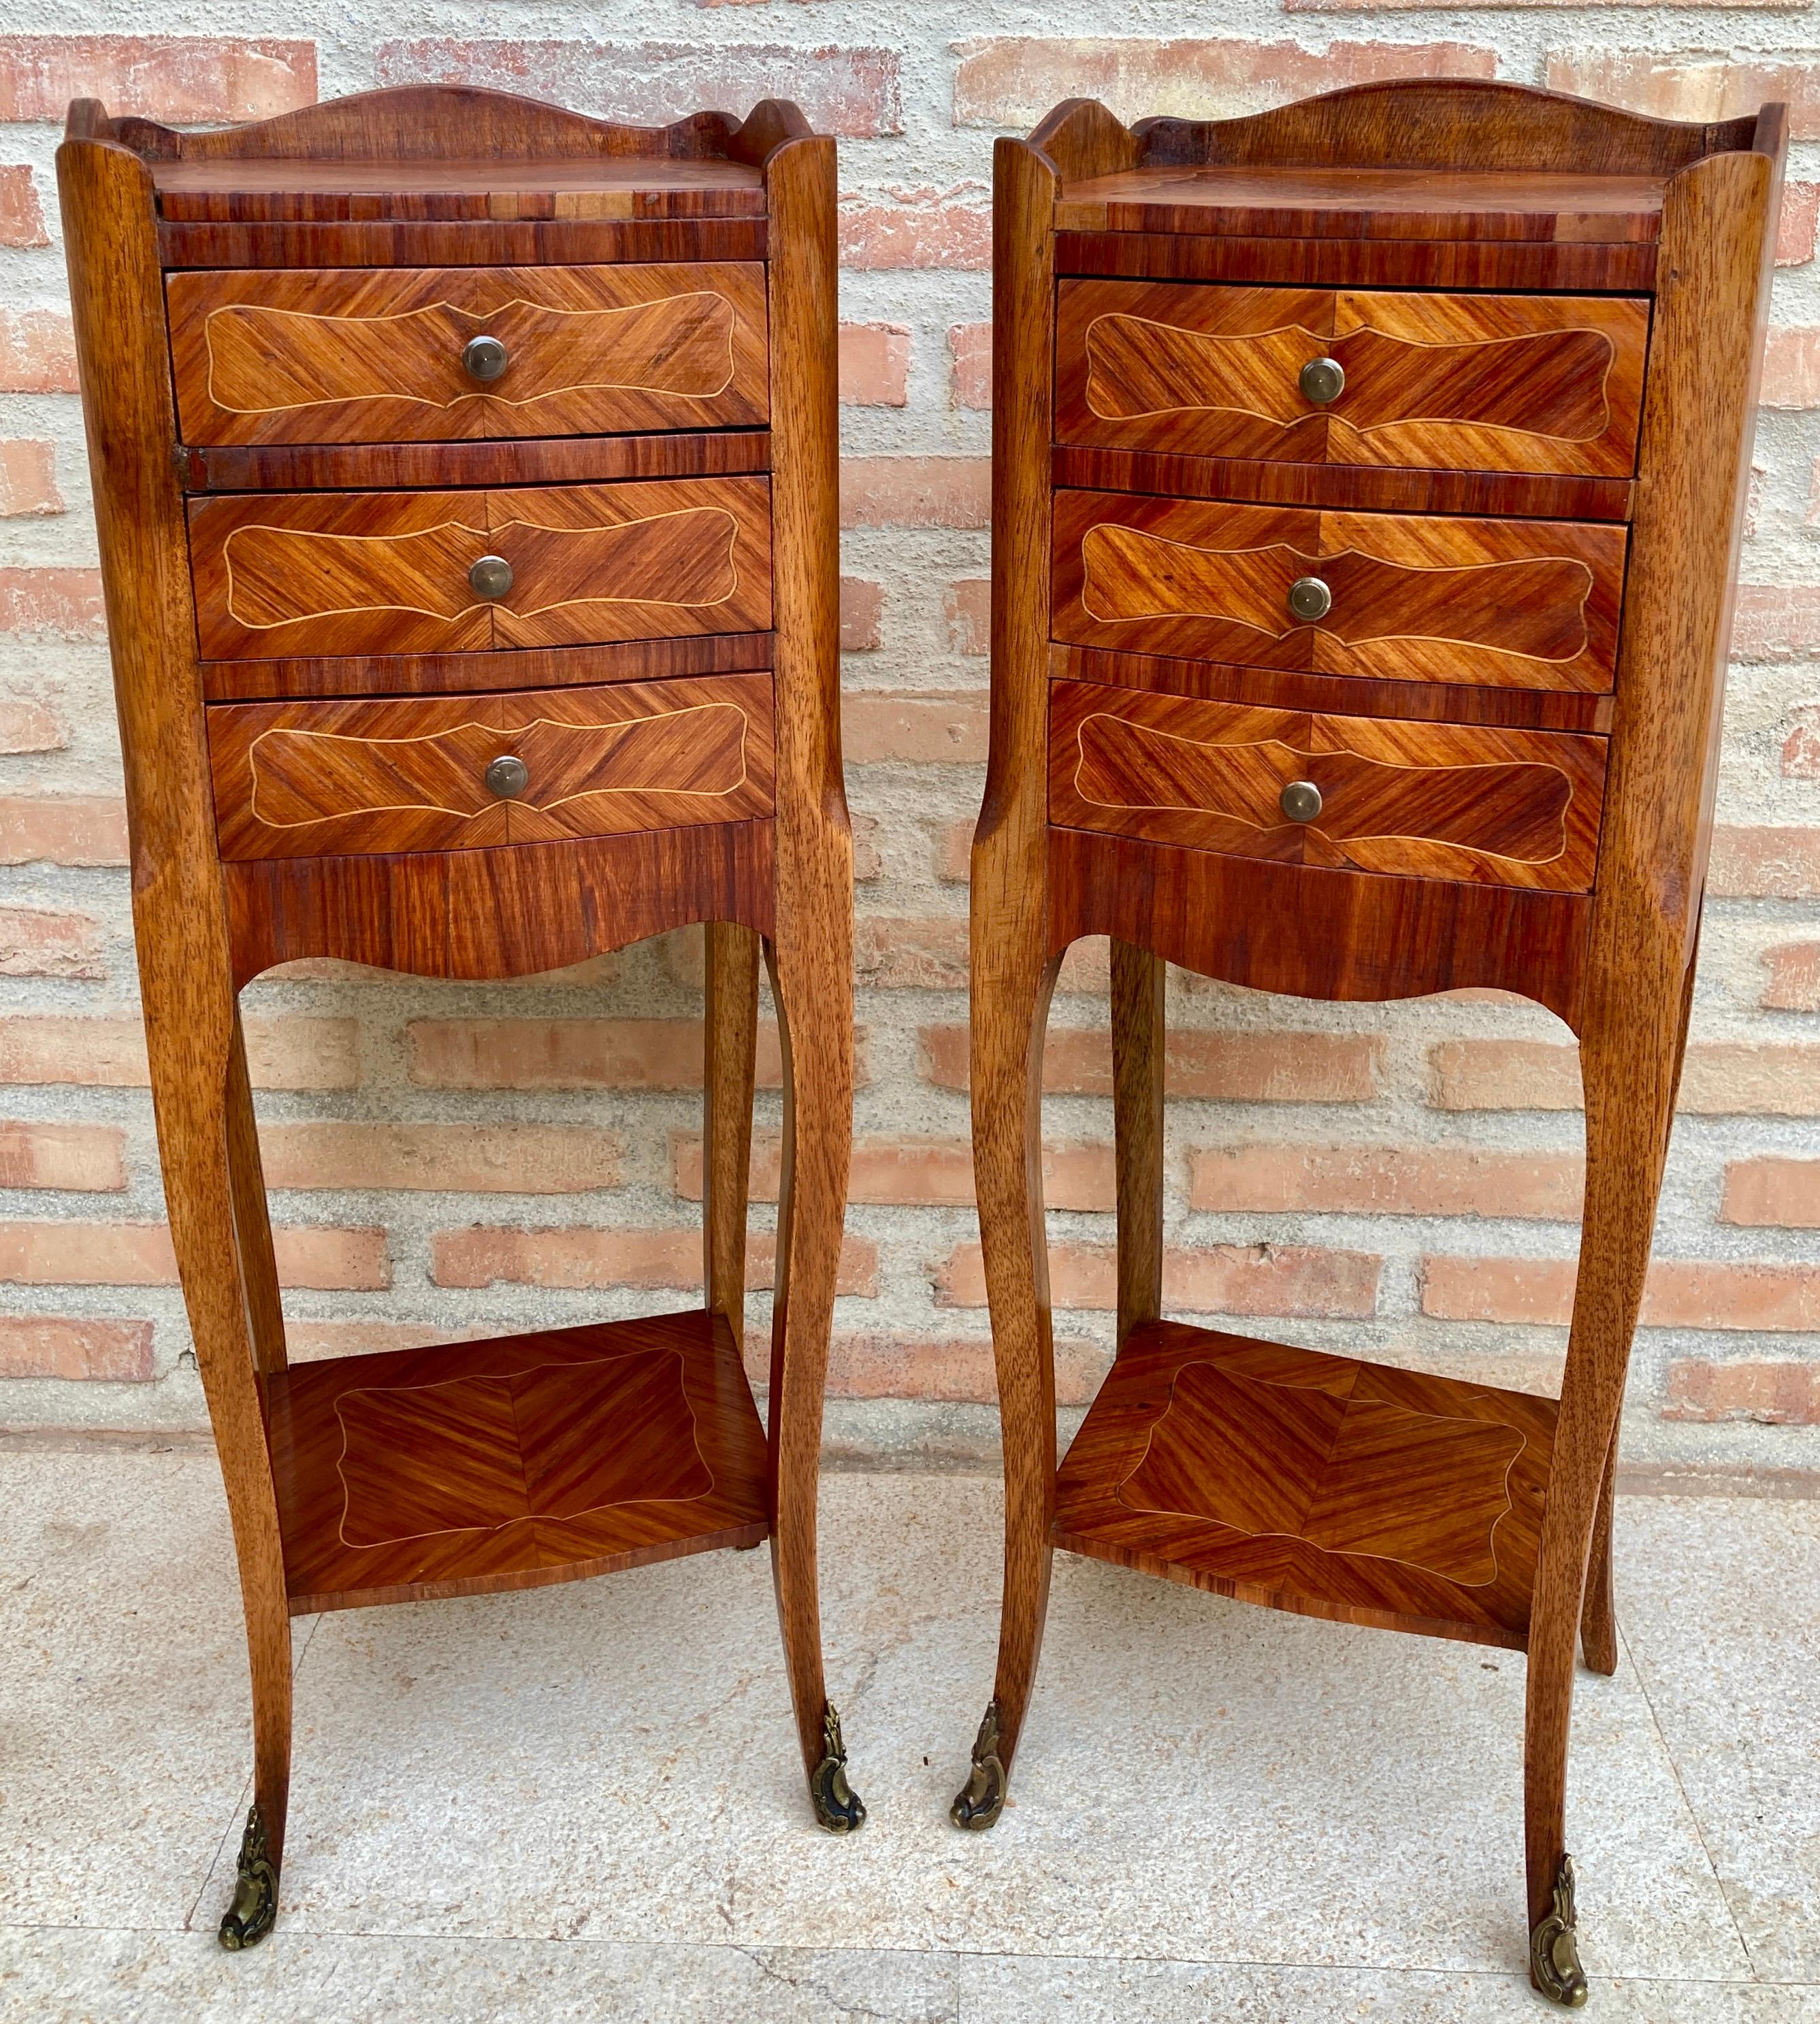 Description Pair of French Walnut Bedside Tables Adorned with Fine Louis XV Mar In Good Condition For Sale In Miami, FL